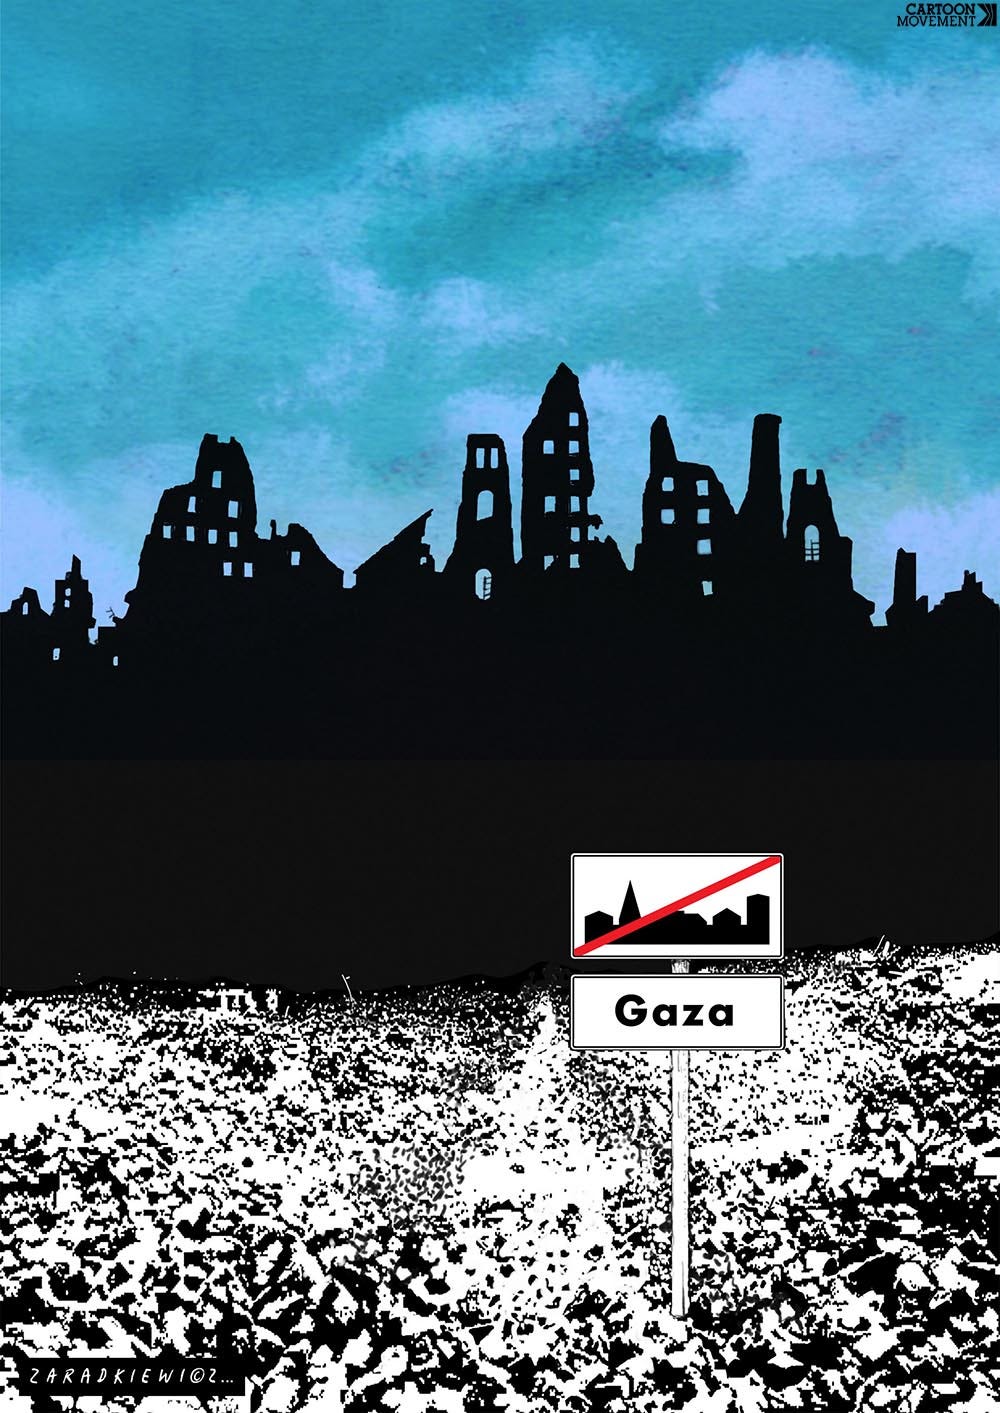 Cartoon showing Gaza in ruins with a 'now leaving the built-up area' traffic sign in front of it.